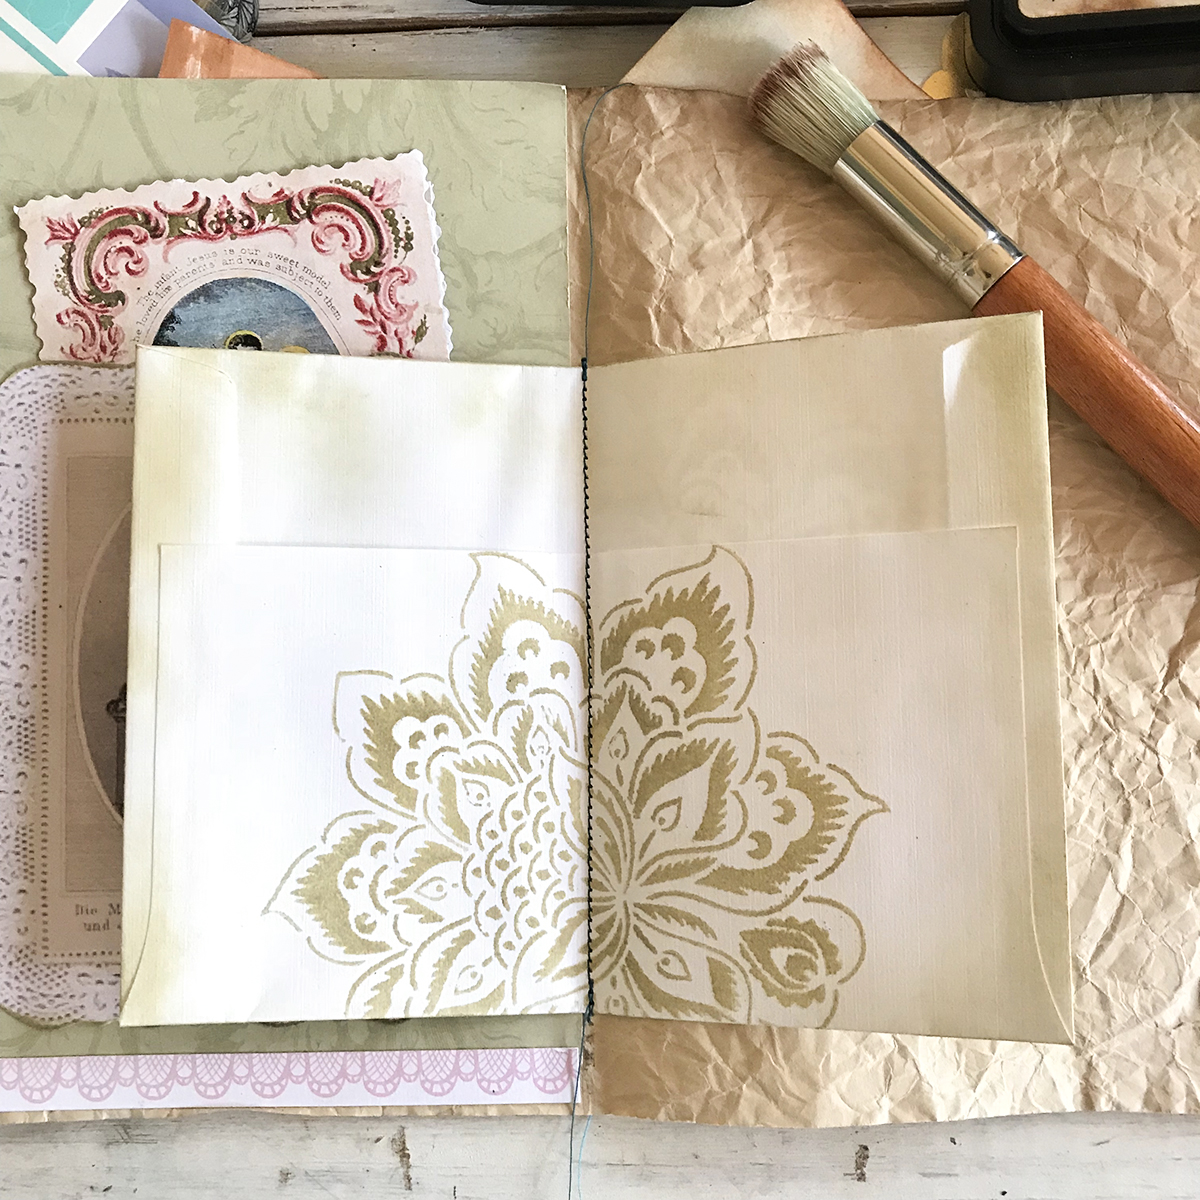 Journal pages with stencil design